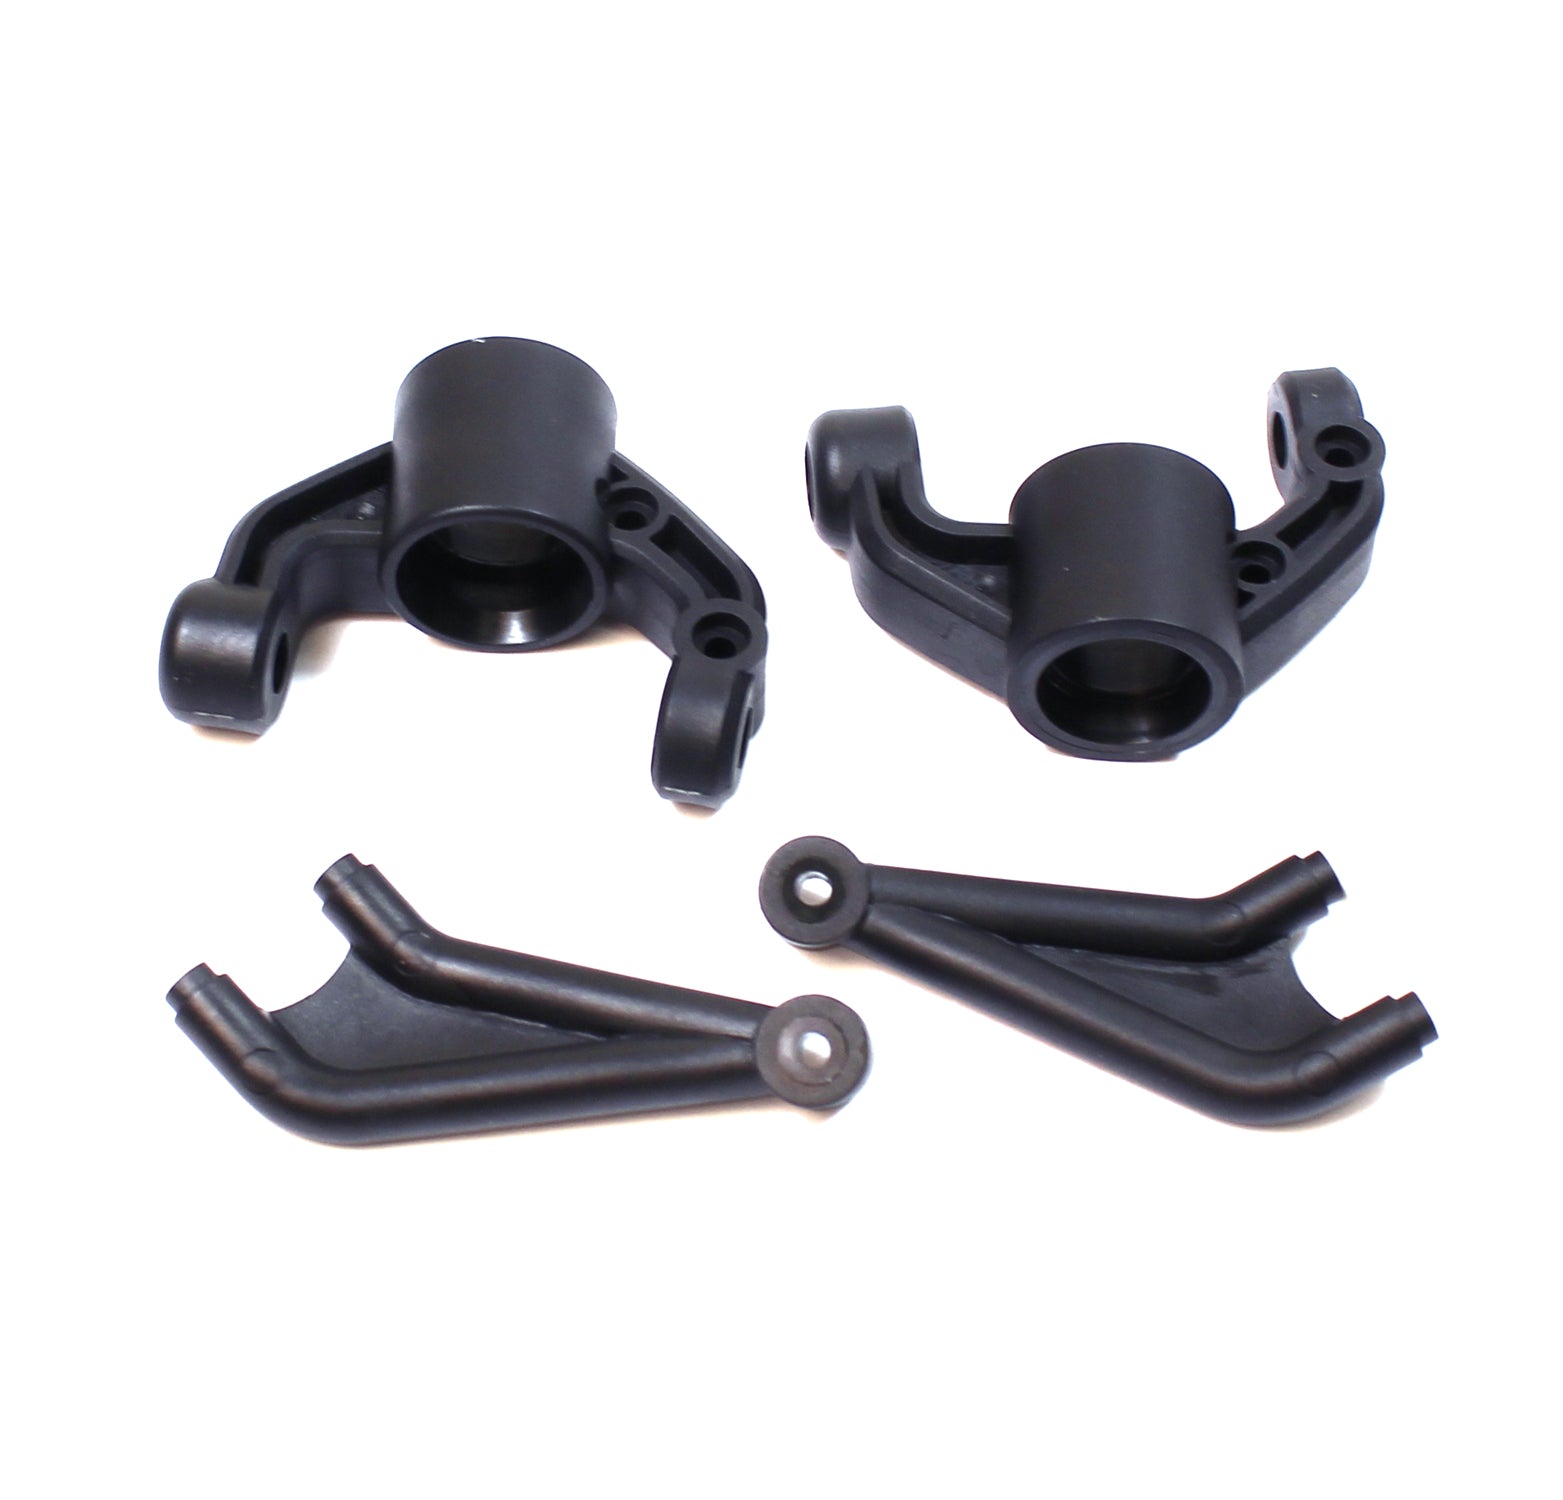 Rage Steering Hub and Caster Block Set, for RZX RGRC6053